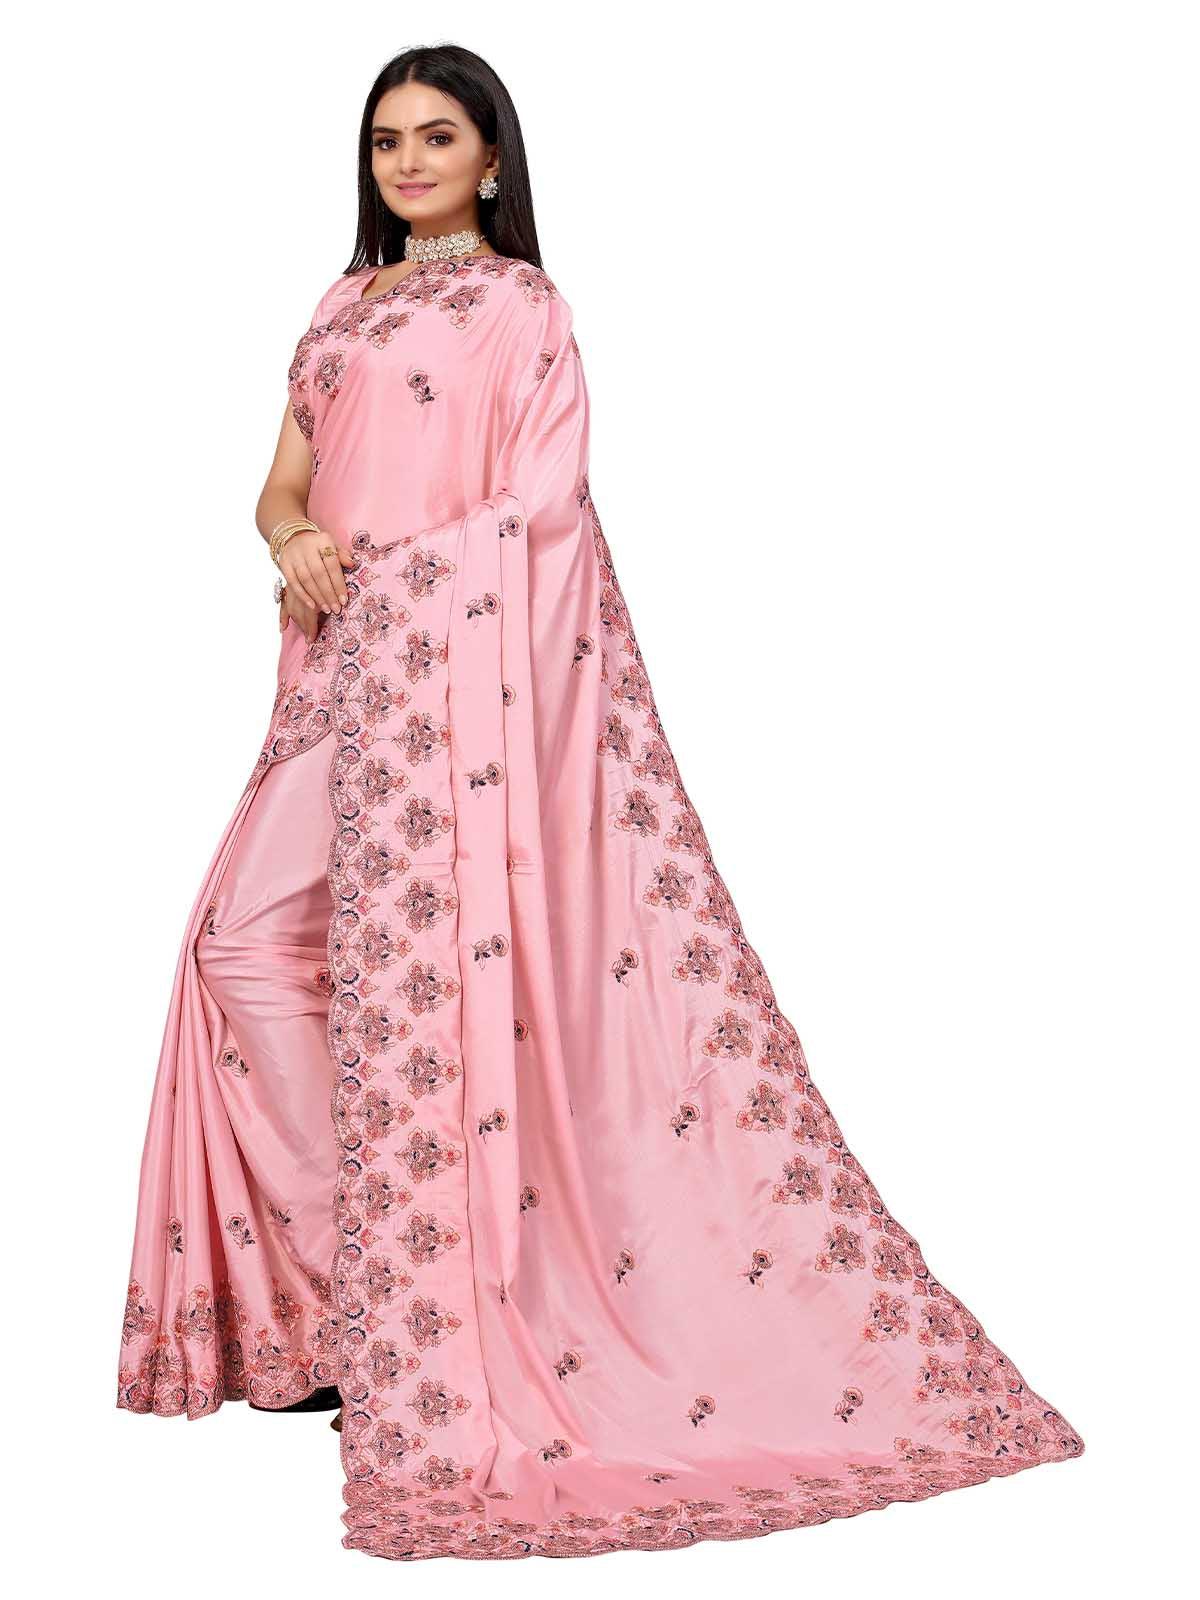 Women's Pink Pure Silk Embroidered Saree With Blouse - Odette